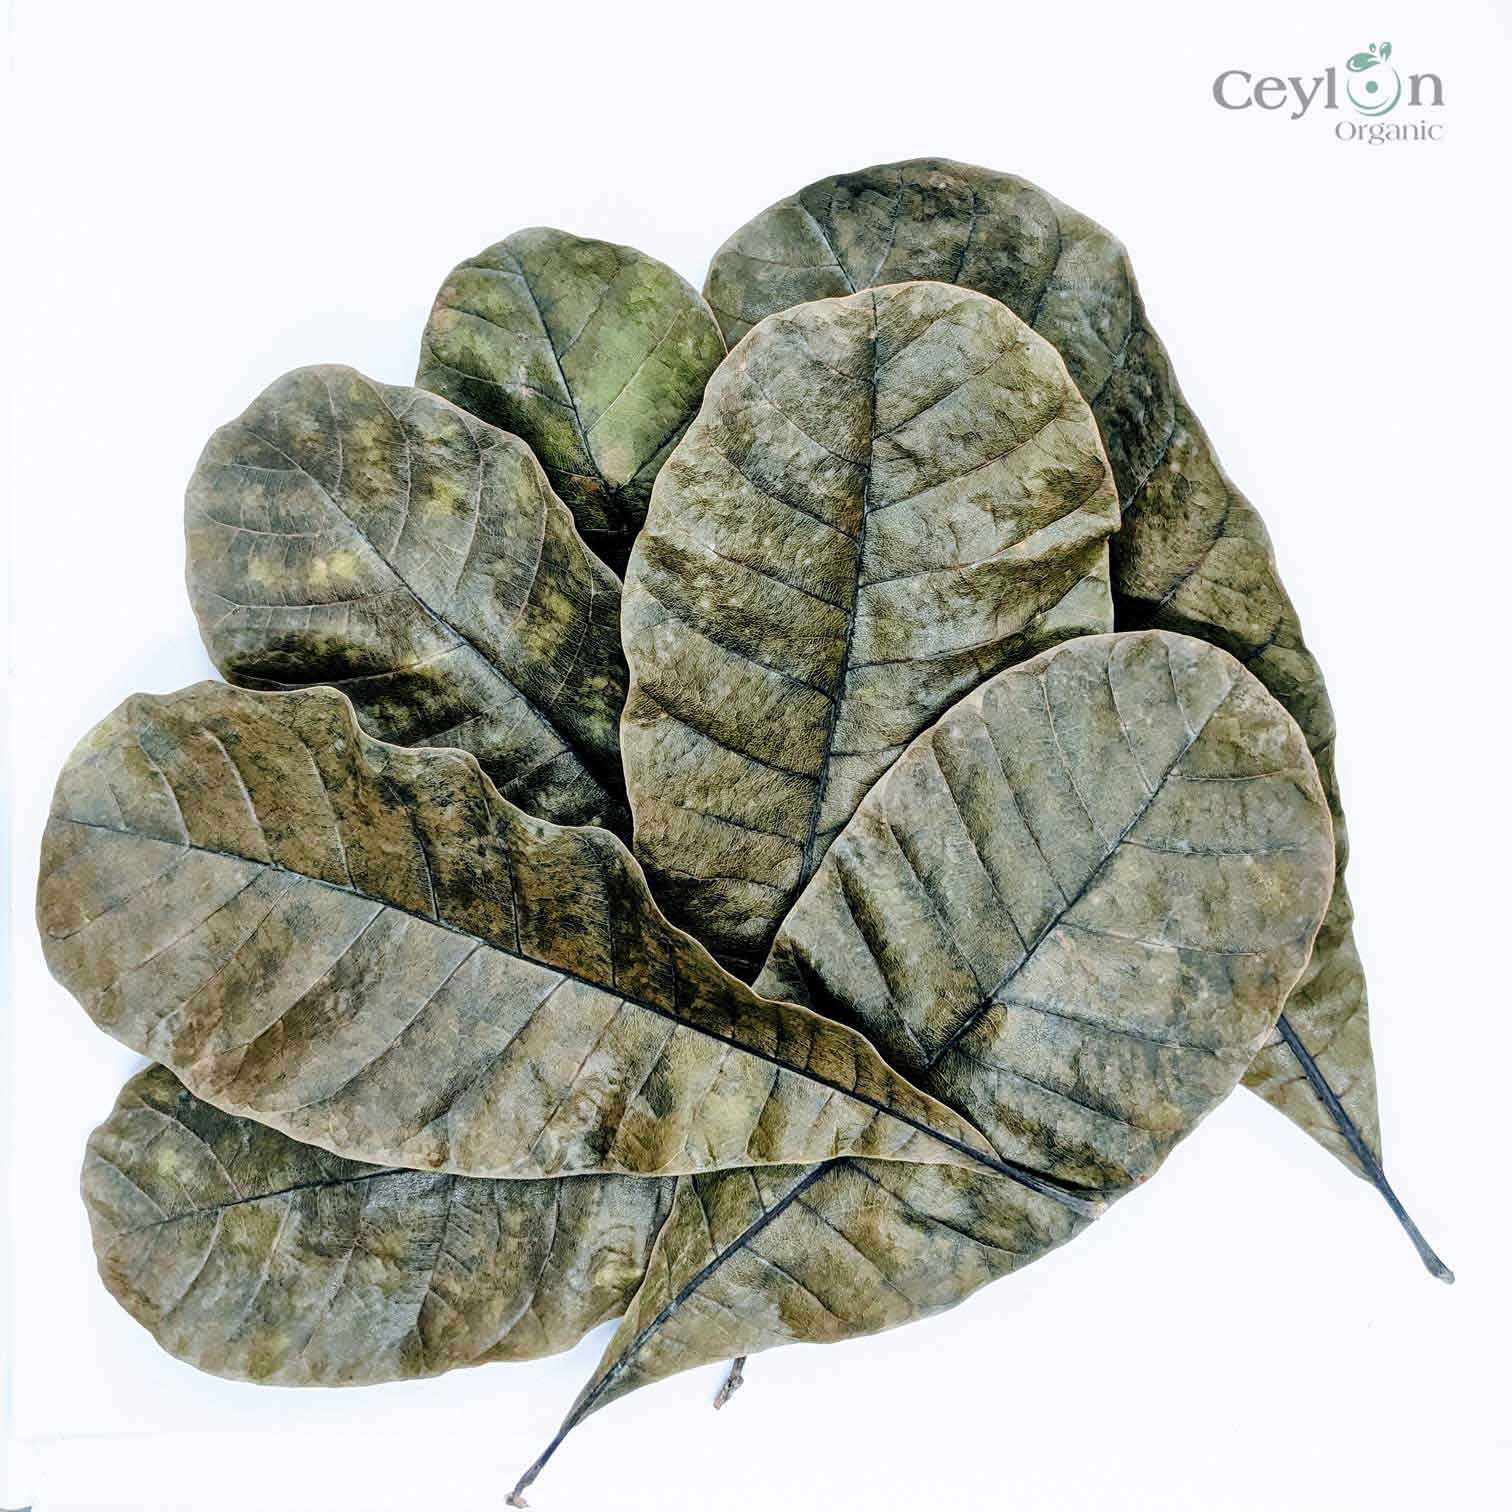 500+ Cashew Leaves for Healthy Living,Dried Cashew Leaves (Anacardium occidentale) | Ceylon Organic-2